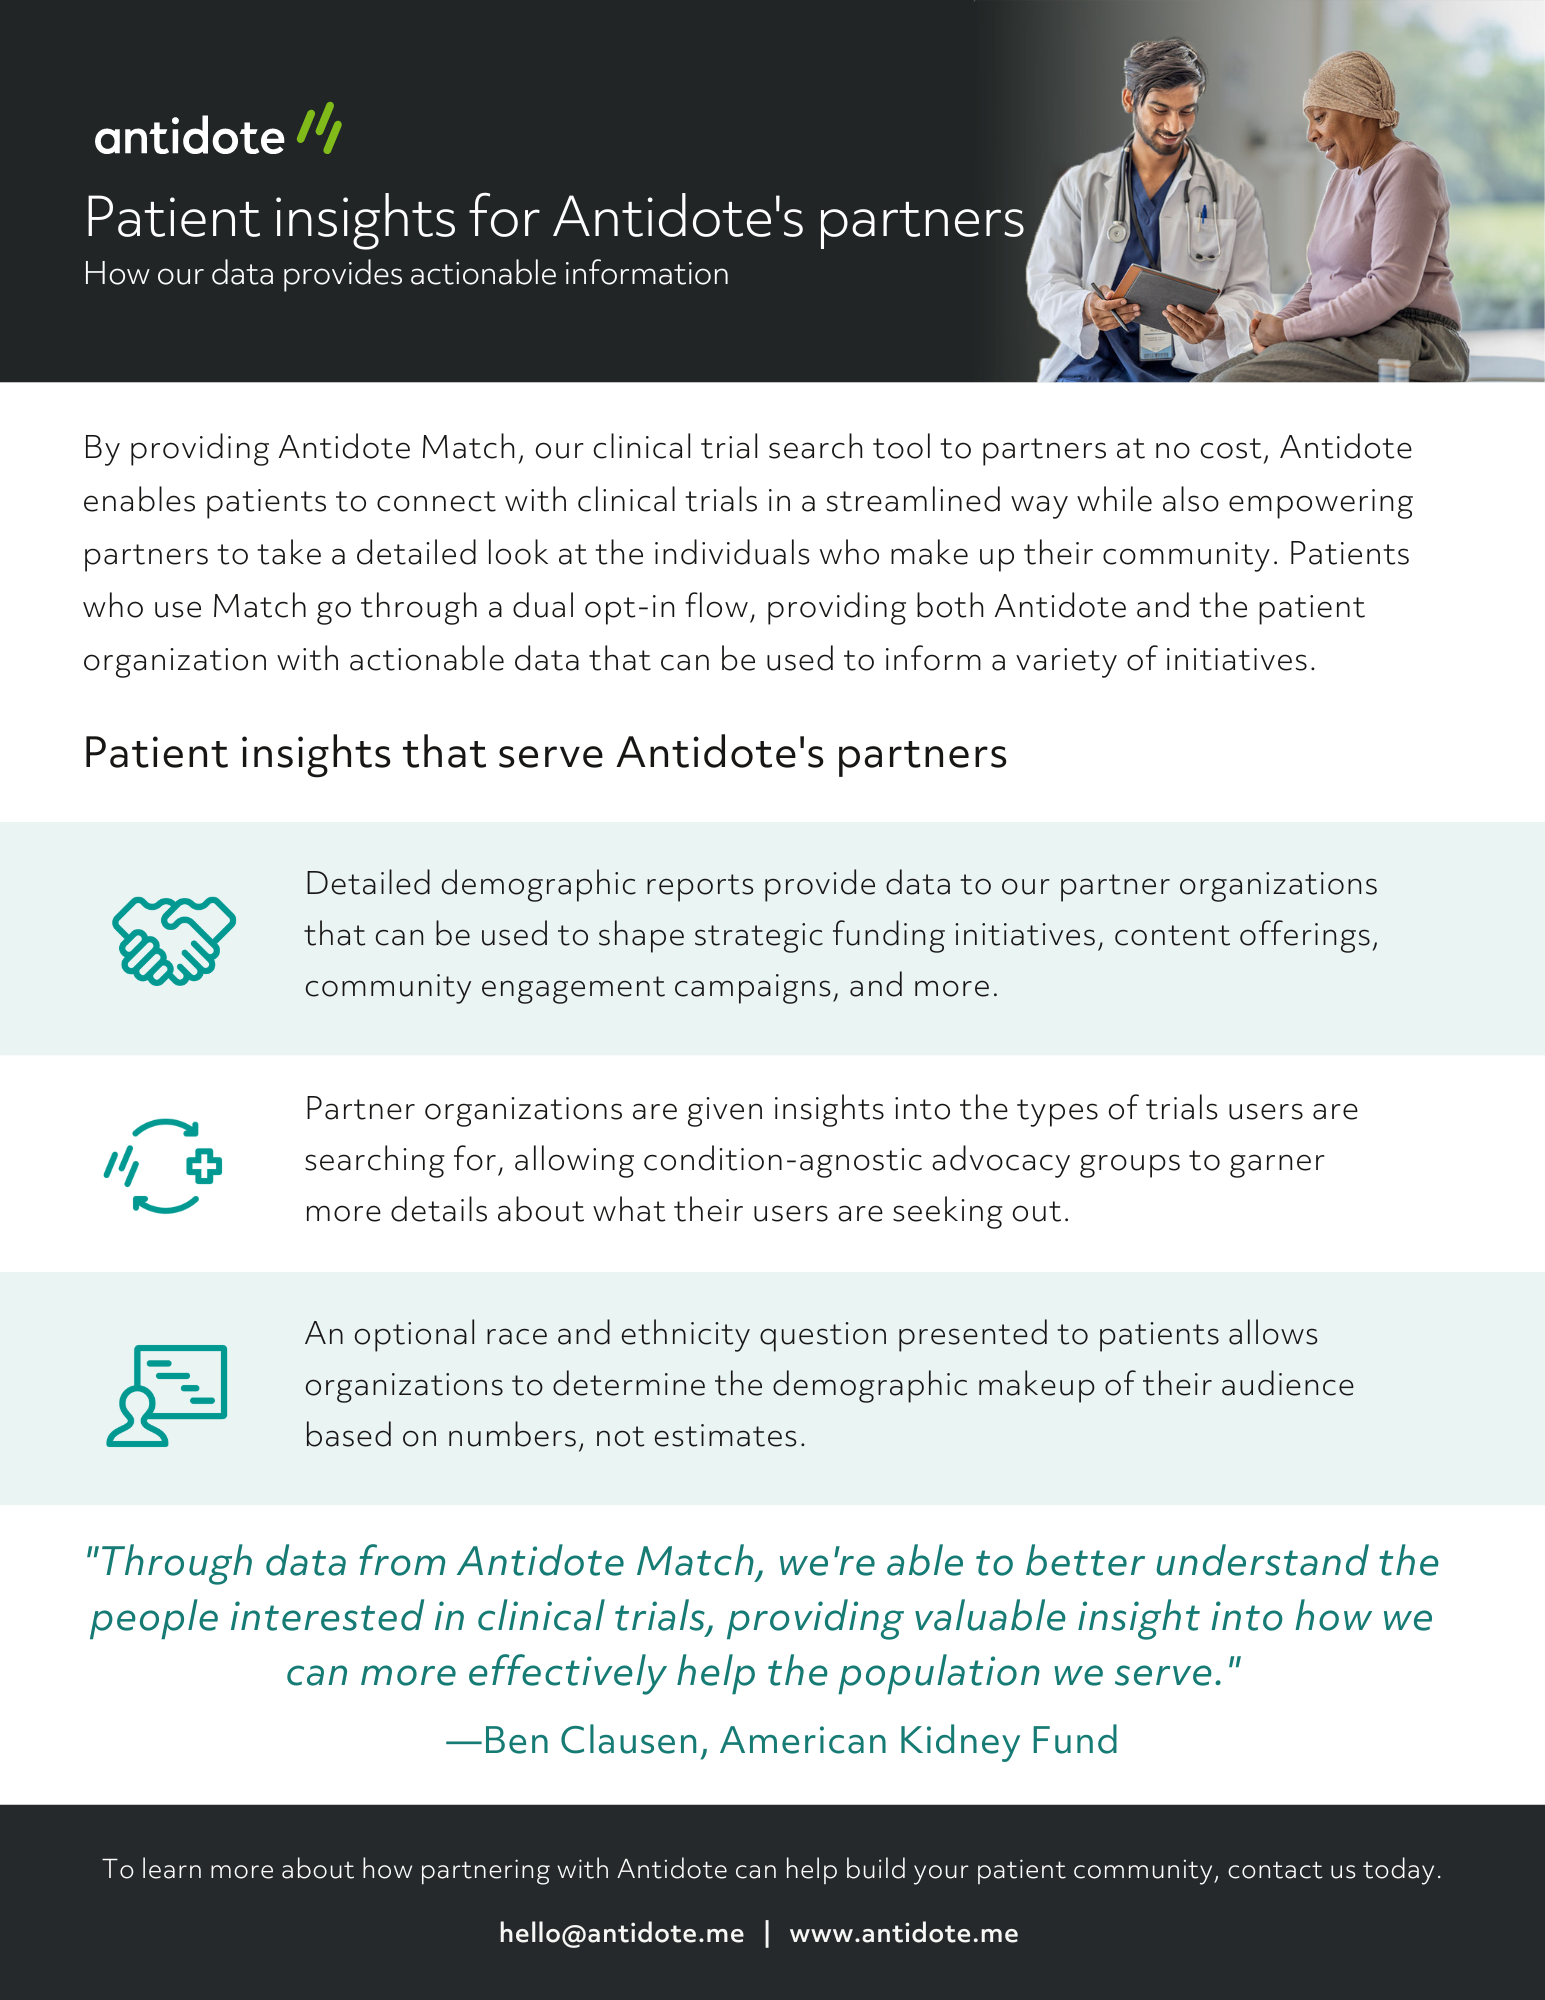 Patient insights one-pager